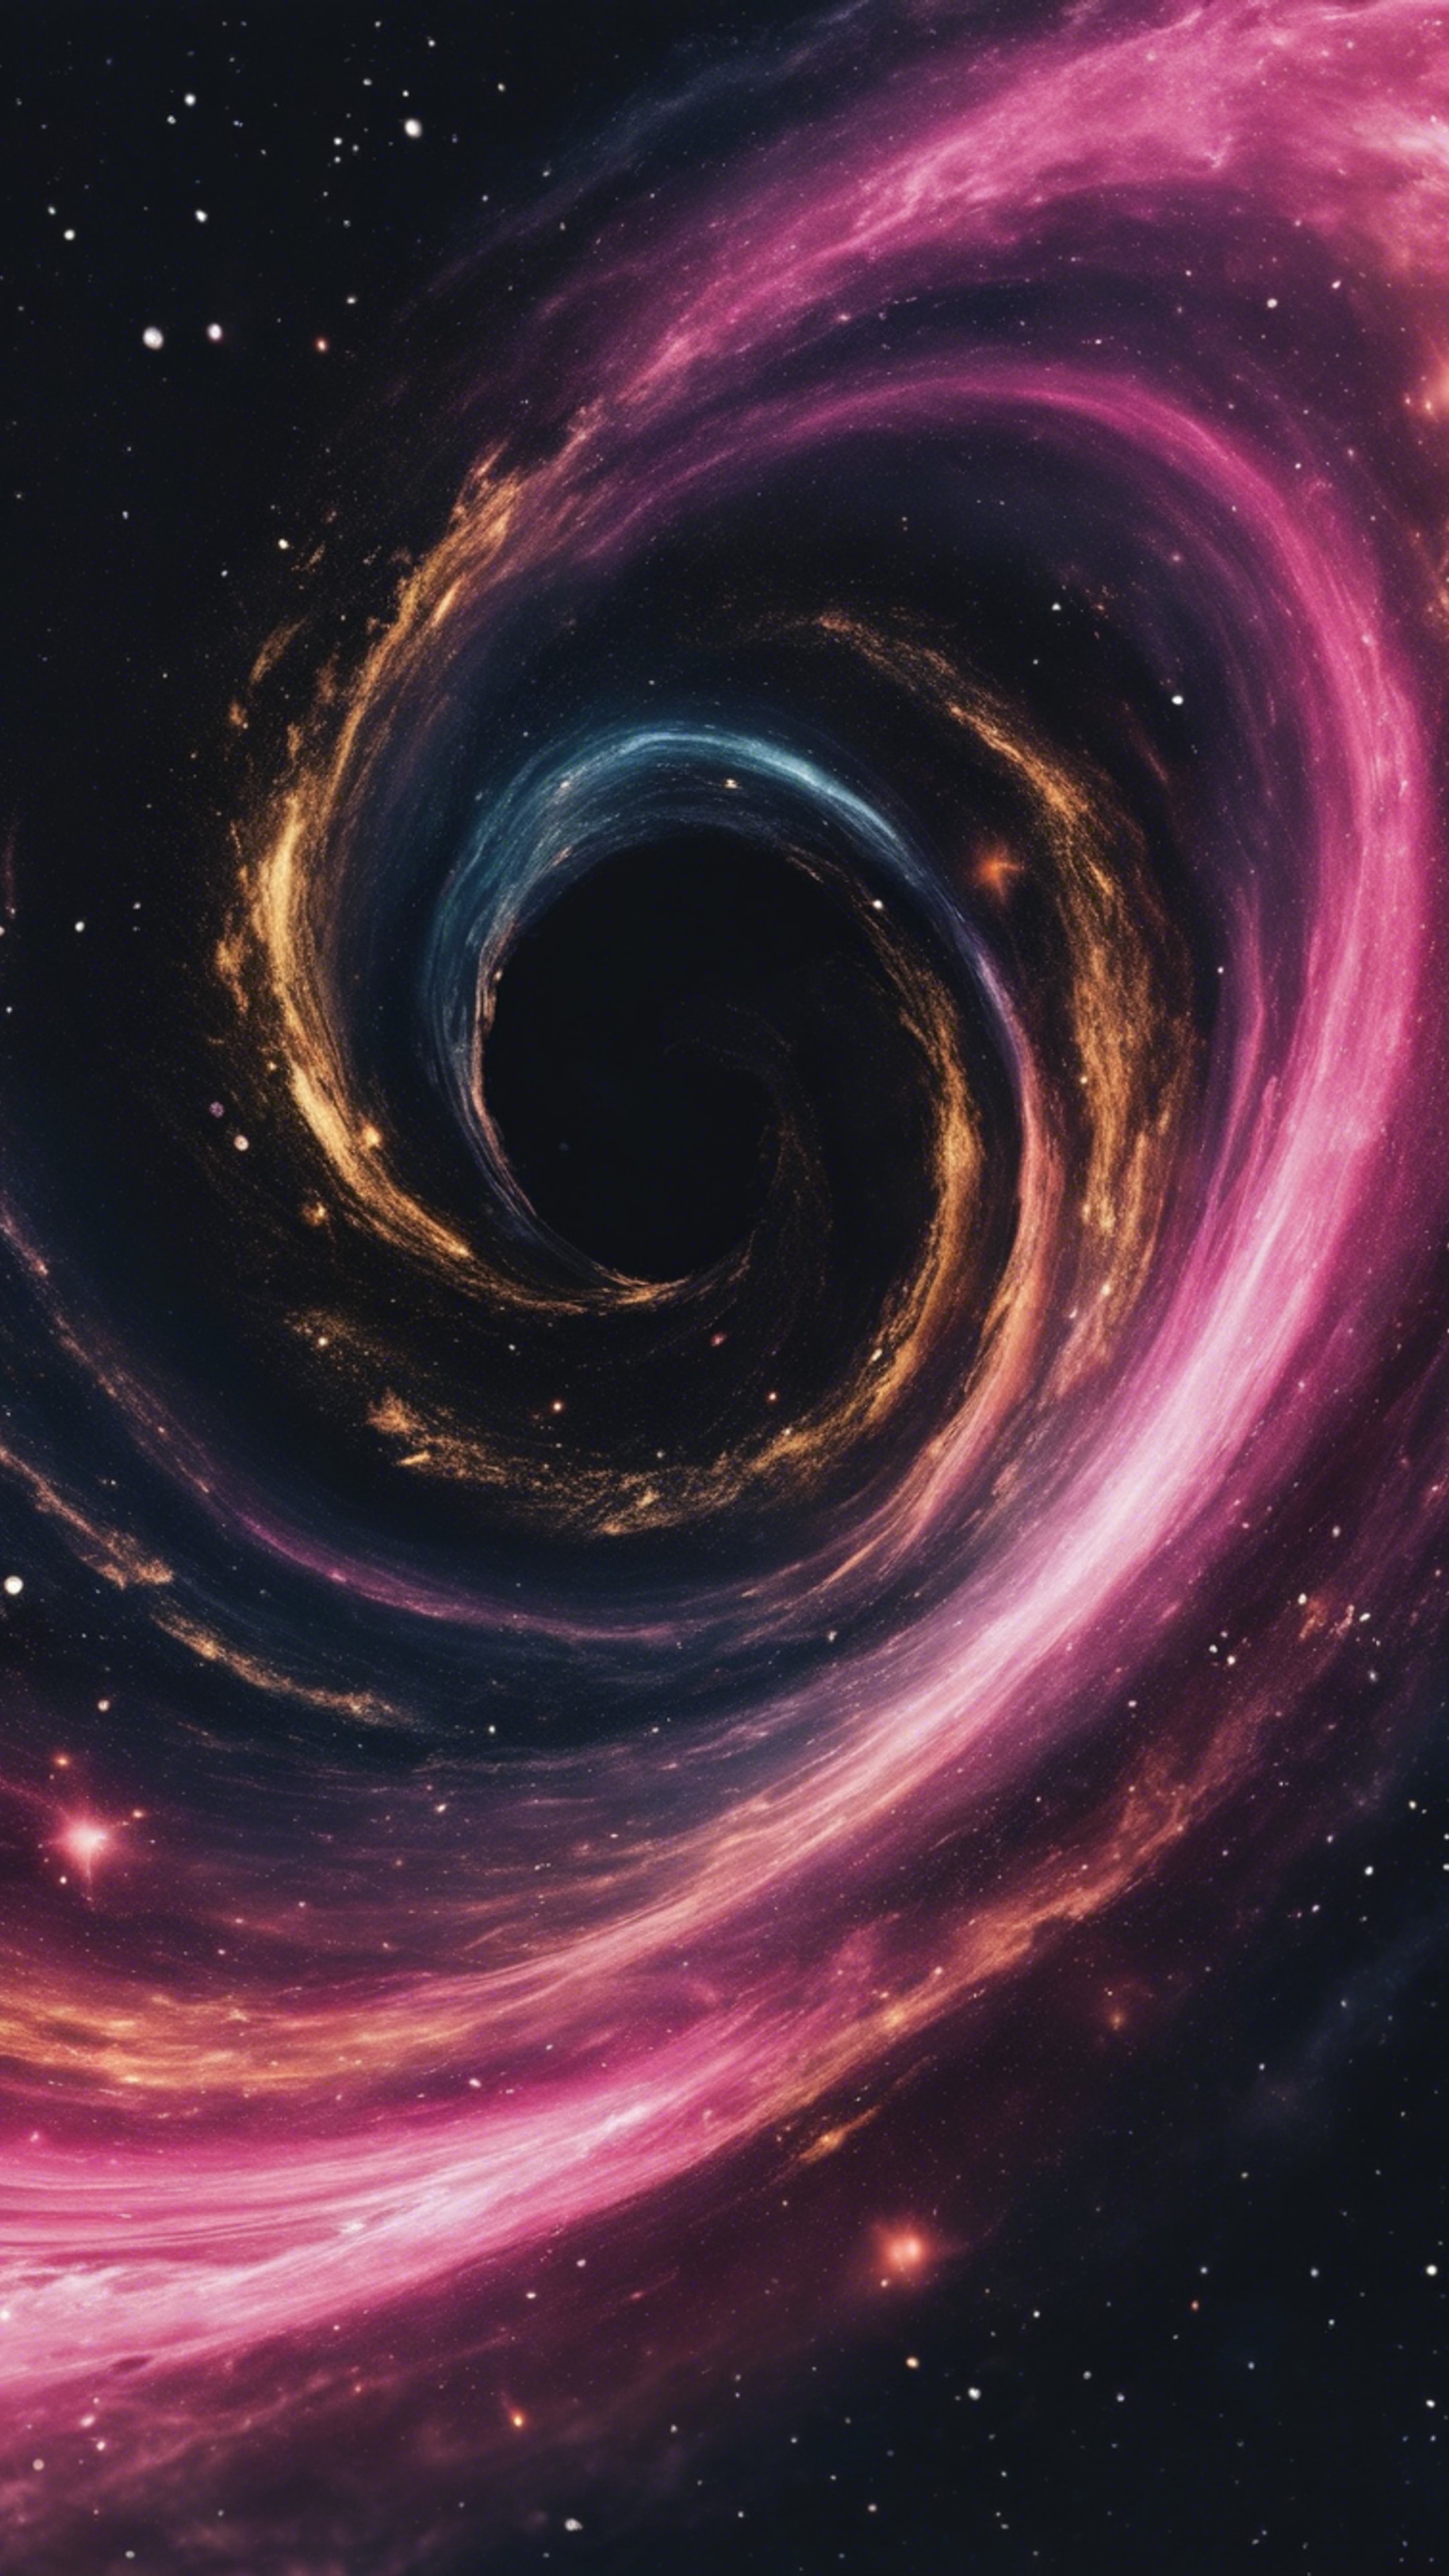 A swirling Galaxy with hues of pink and gold amongst the dark void of space.壁紙[38386911806f452c9333]